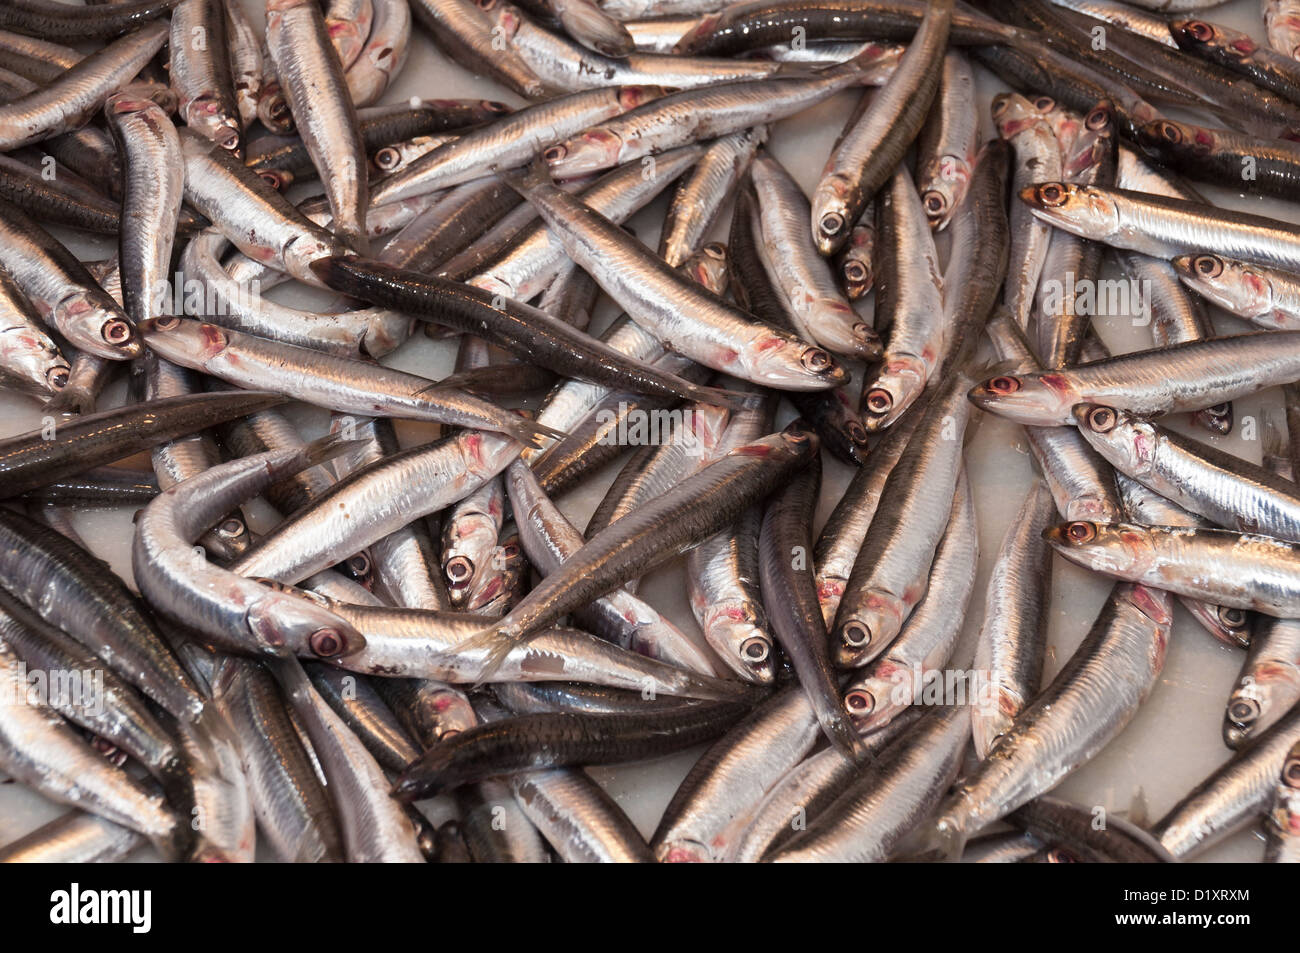 A typical fish for Malaga. It is prepared in various ways. Stock Photo